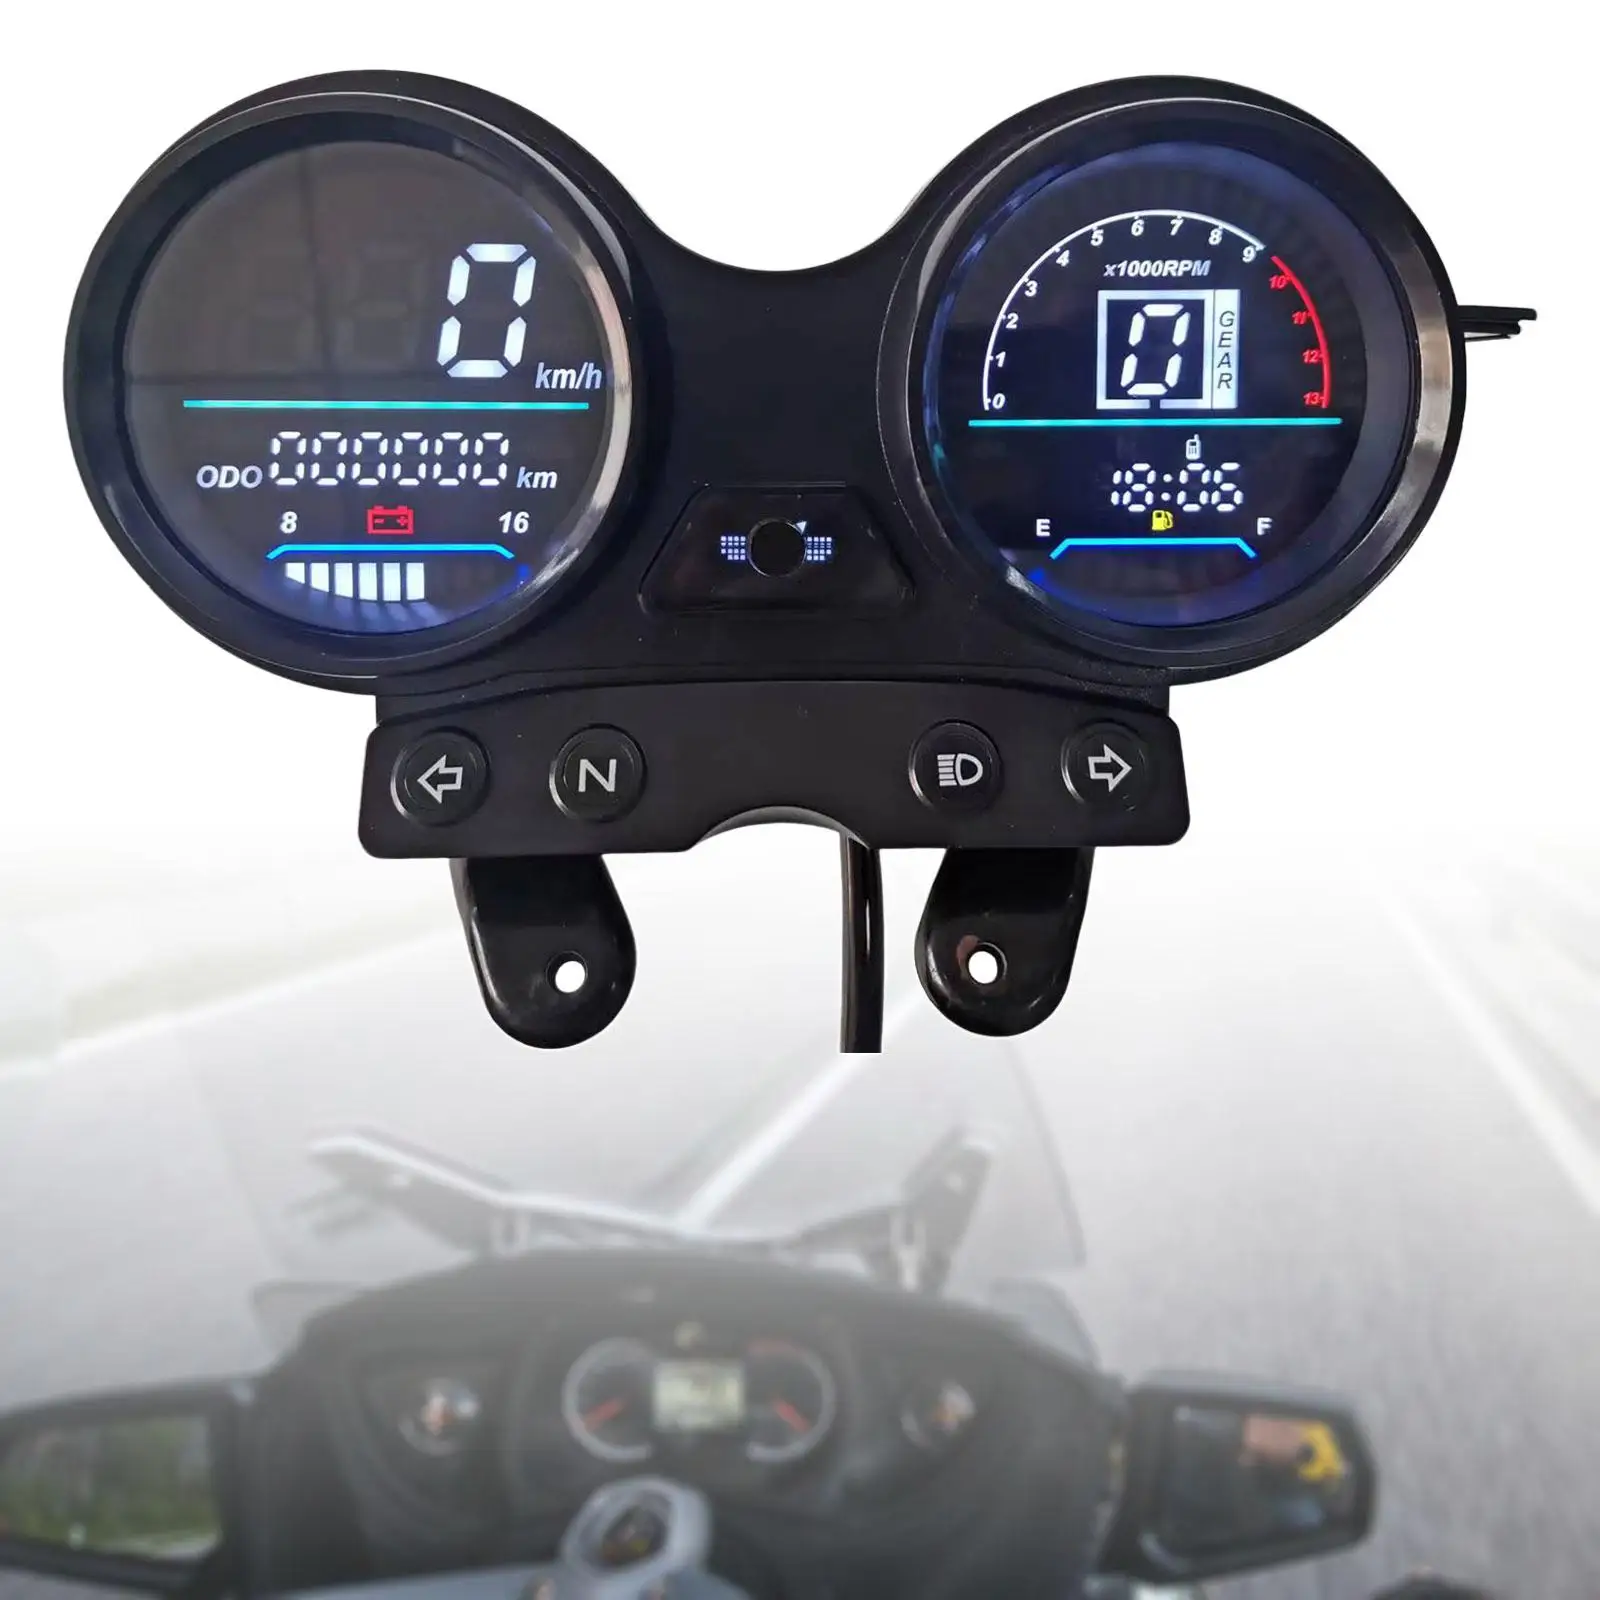 DC 12V Motorcycle Odometer Speedometer for Ybr 125 Professional Sturdy